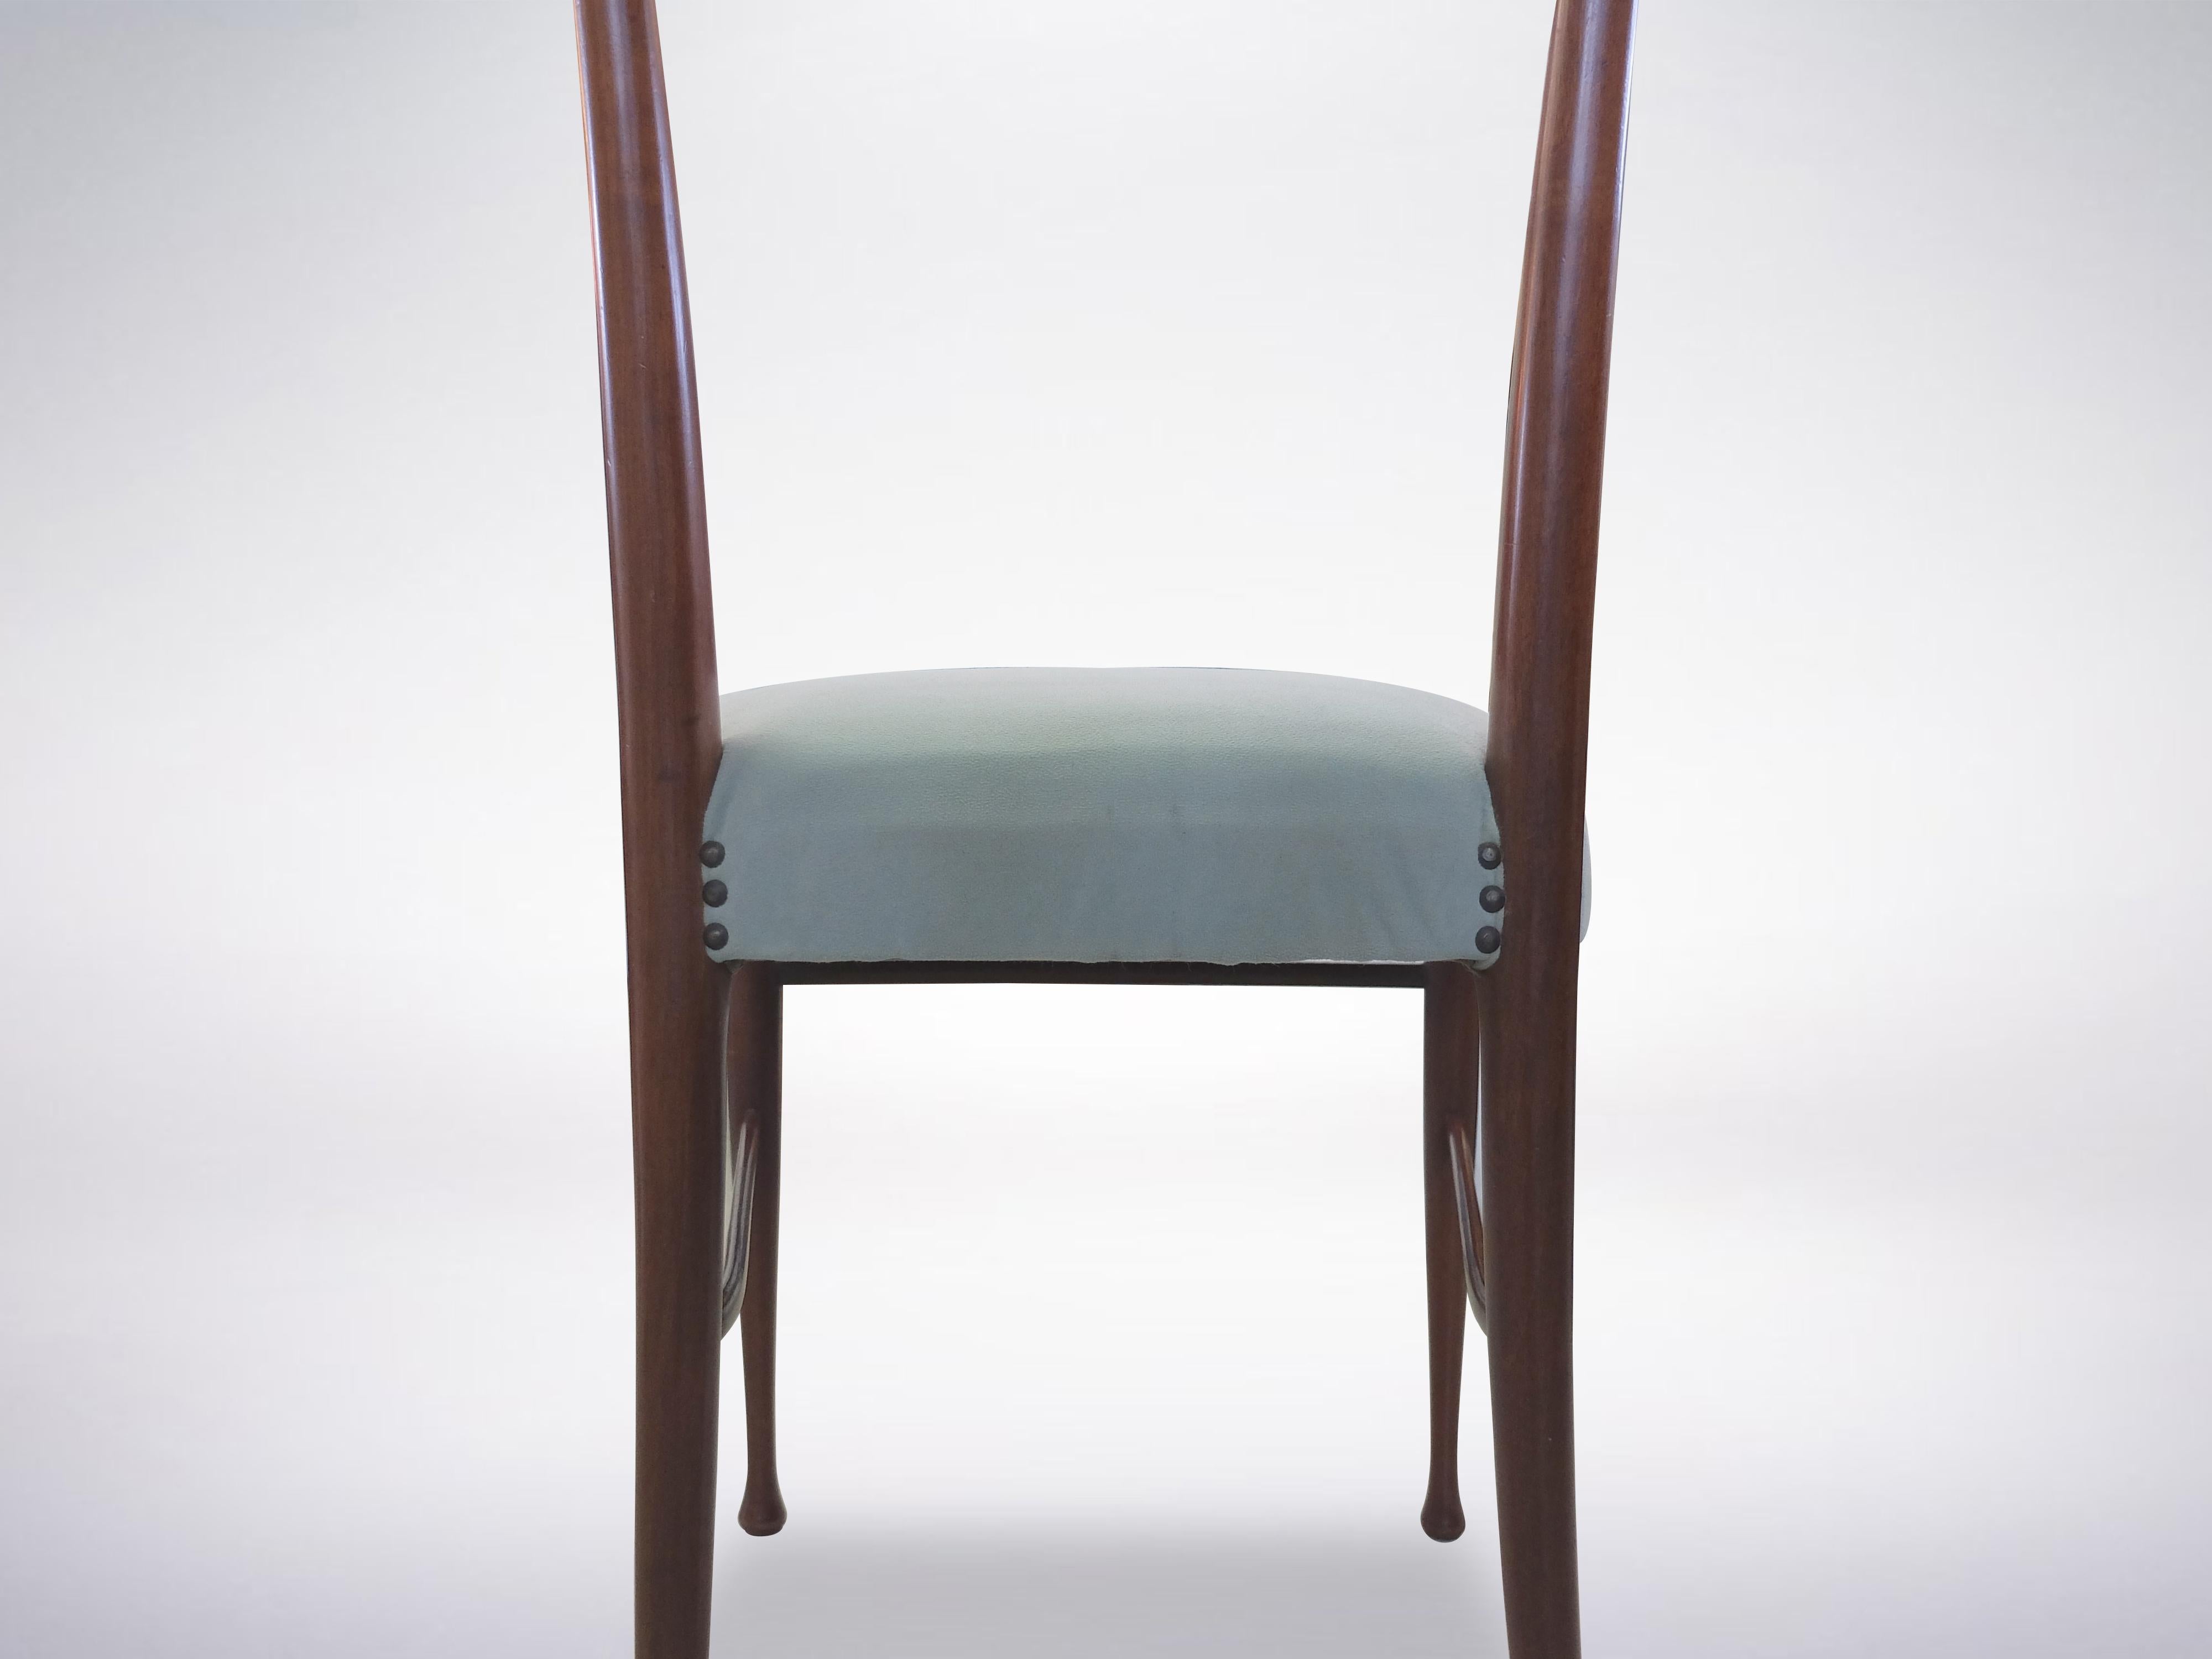 Mid-20th Century Guglielmo Ulrich, Italian Mid-Century Wooden Chairs with Blue Velvet Seats 1960s For Sale